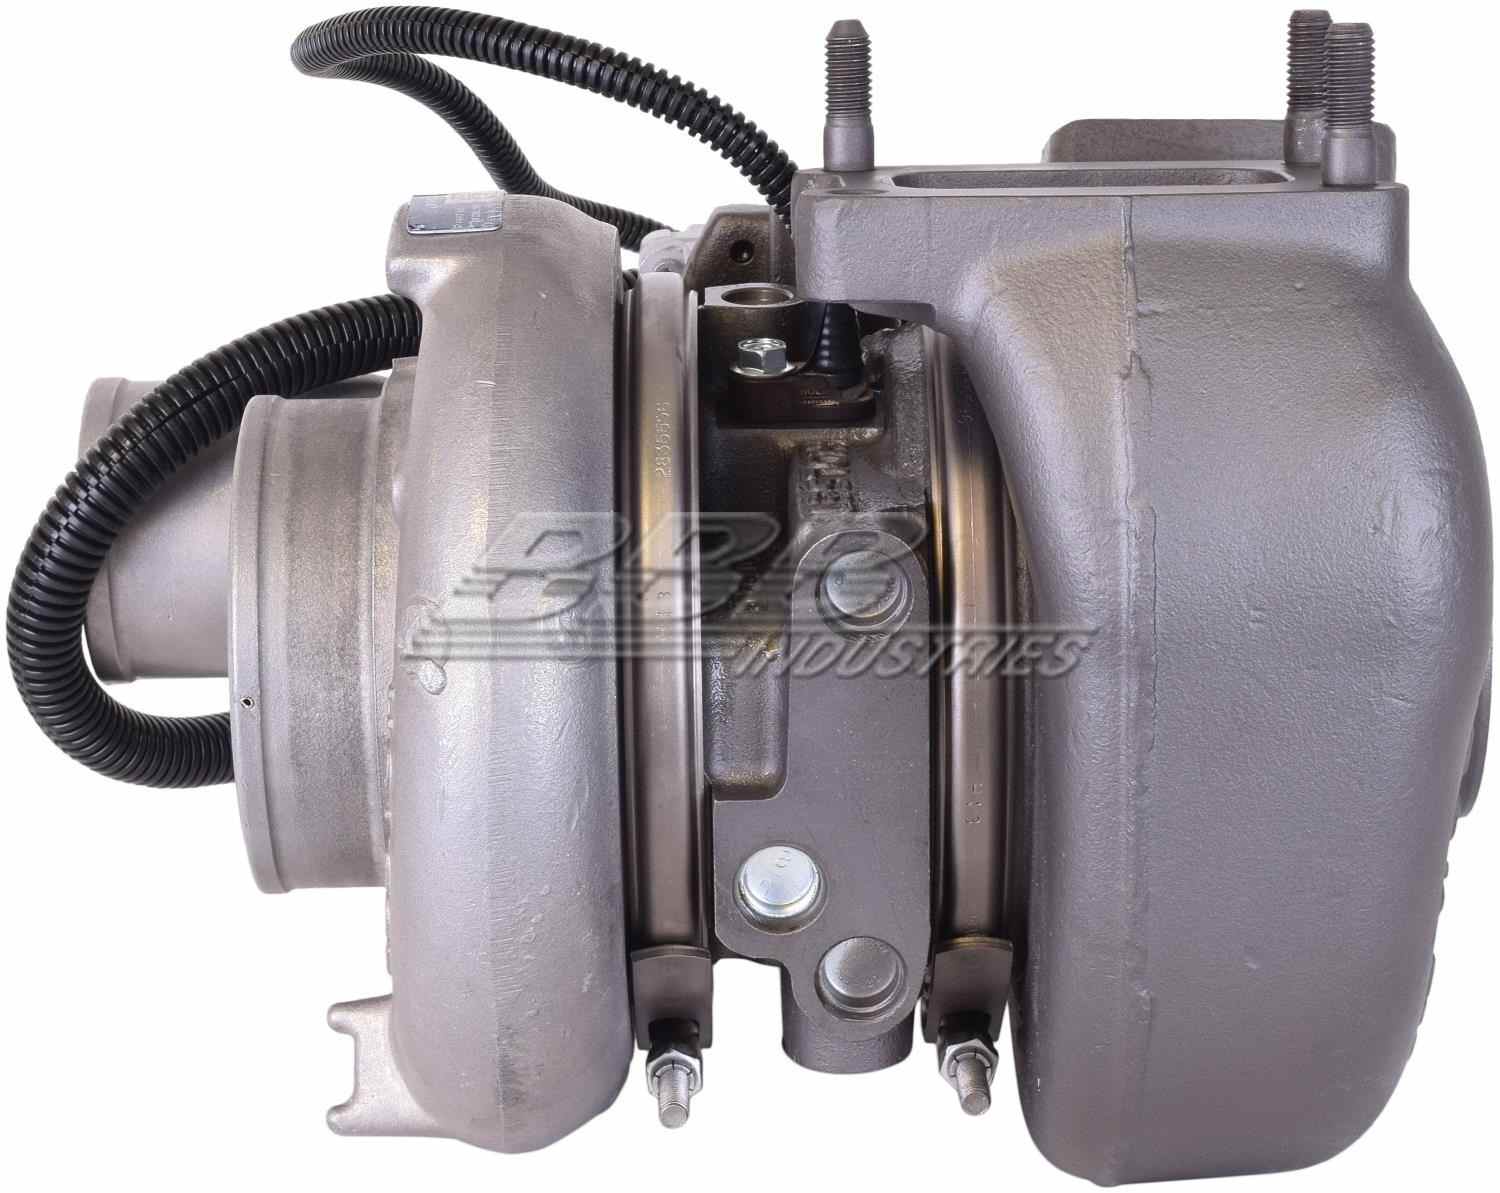 OE-TurboPower Remanufactured Turbocharger  top view frsport D2013